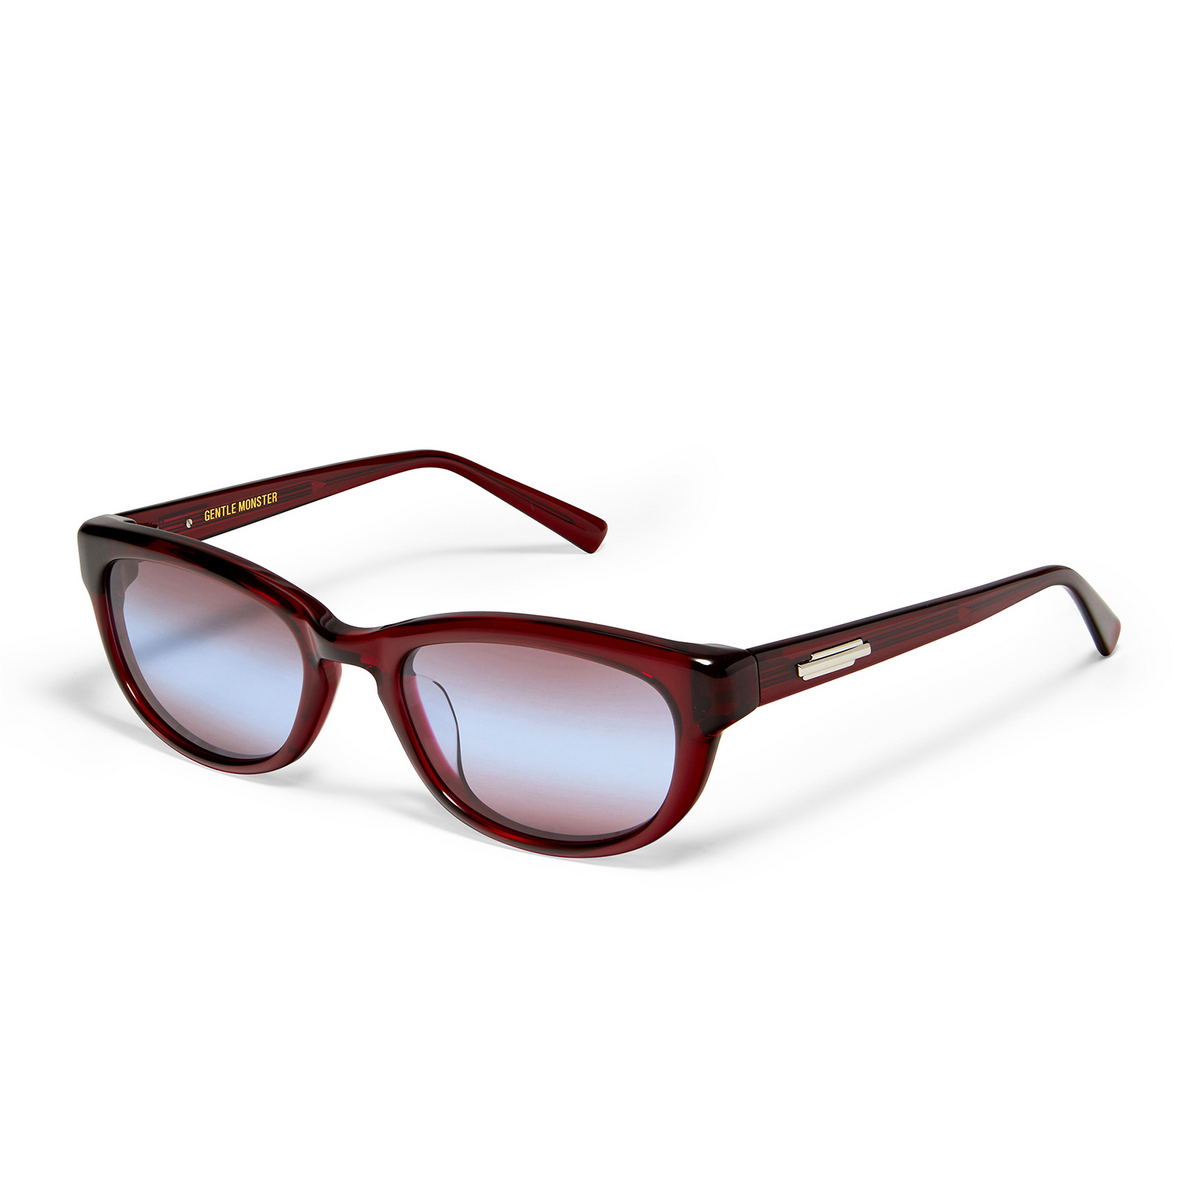 Gentle Monster® Cat-eye Sunglasses: Reny color RC2 Red - three-quarters view